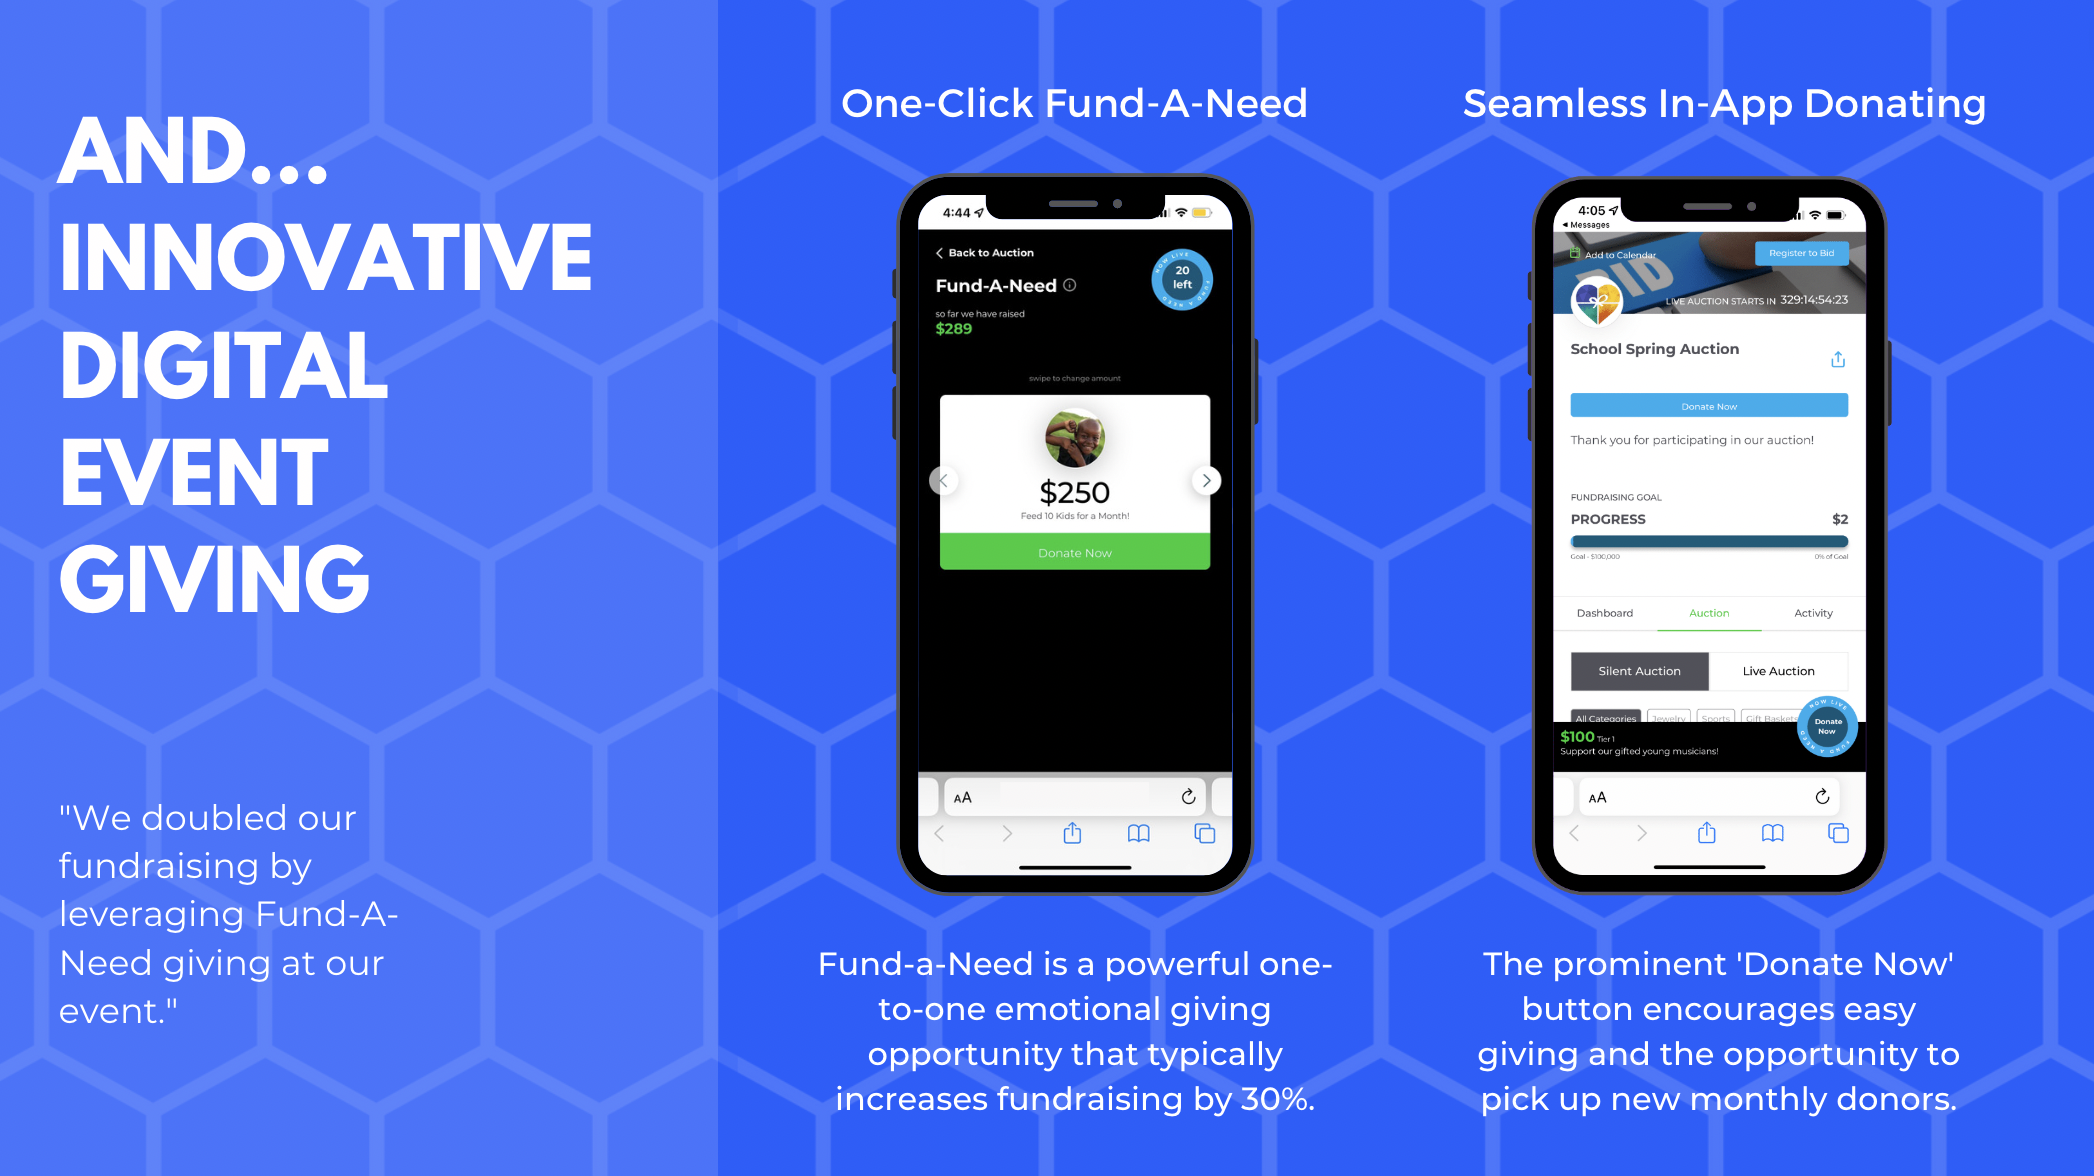 ZGIVE offers an innovative digital giving experience with Fund-A-Need, a one-to-one giving feature that helps nonprofits make a direct ask for a specific need or purpose. Our in-app donation button encourages general donations and new monthly donors.